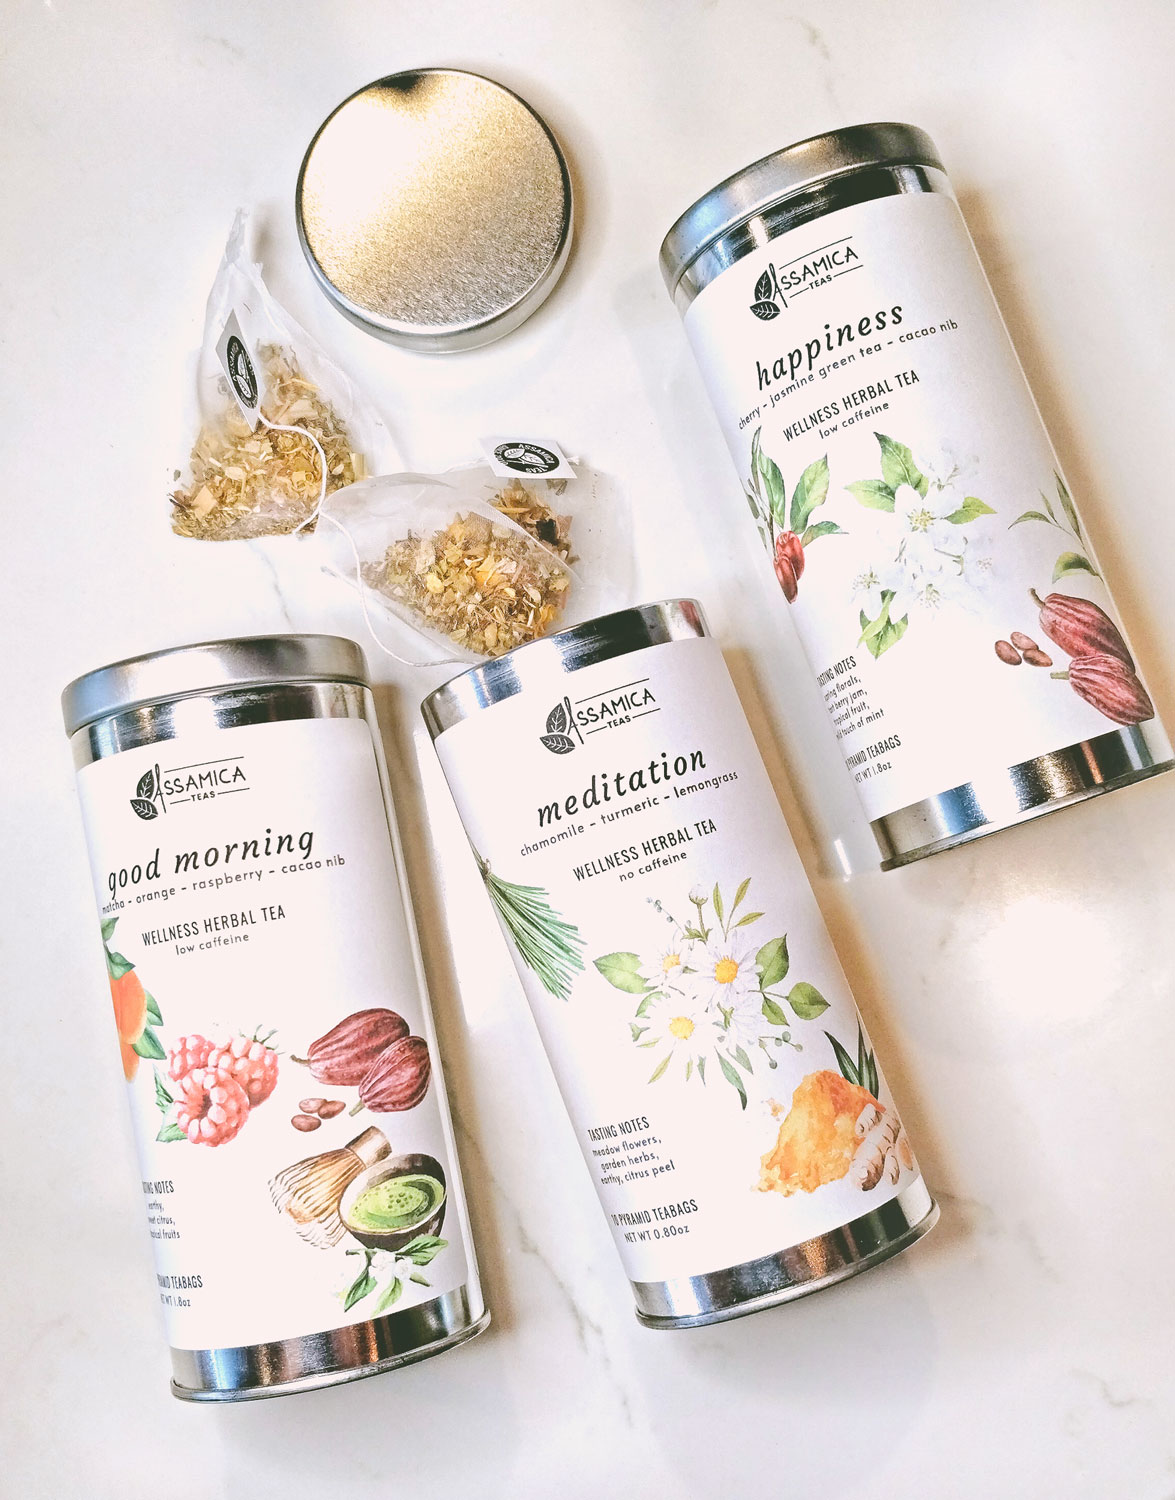 3 Wellness Teas in long tin containers, with 2 pyramid teabags spilling out of one container.